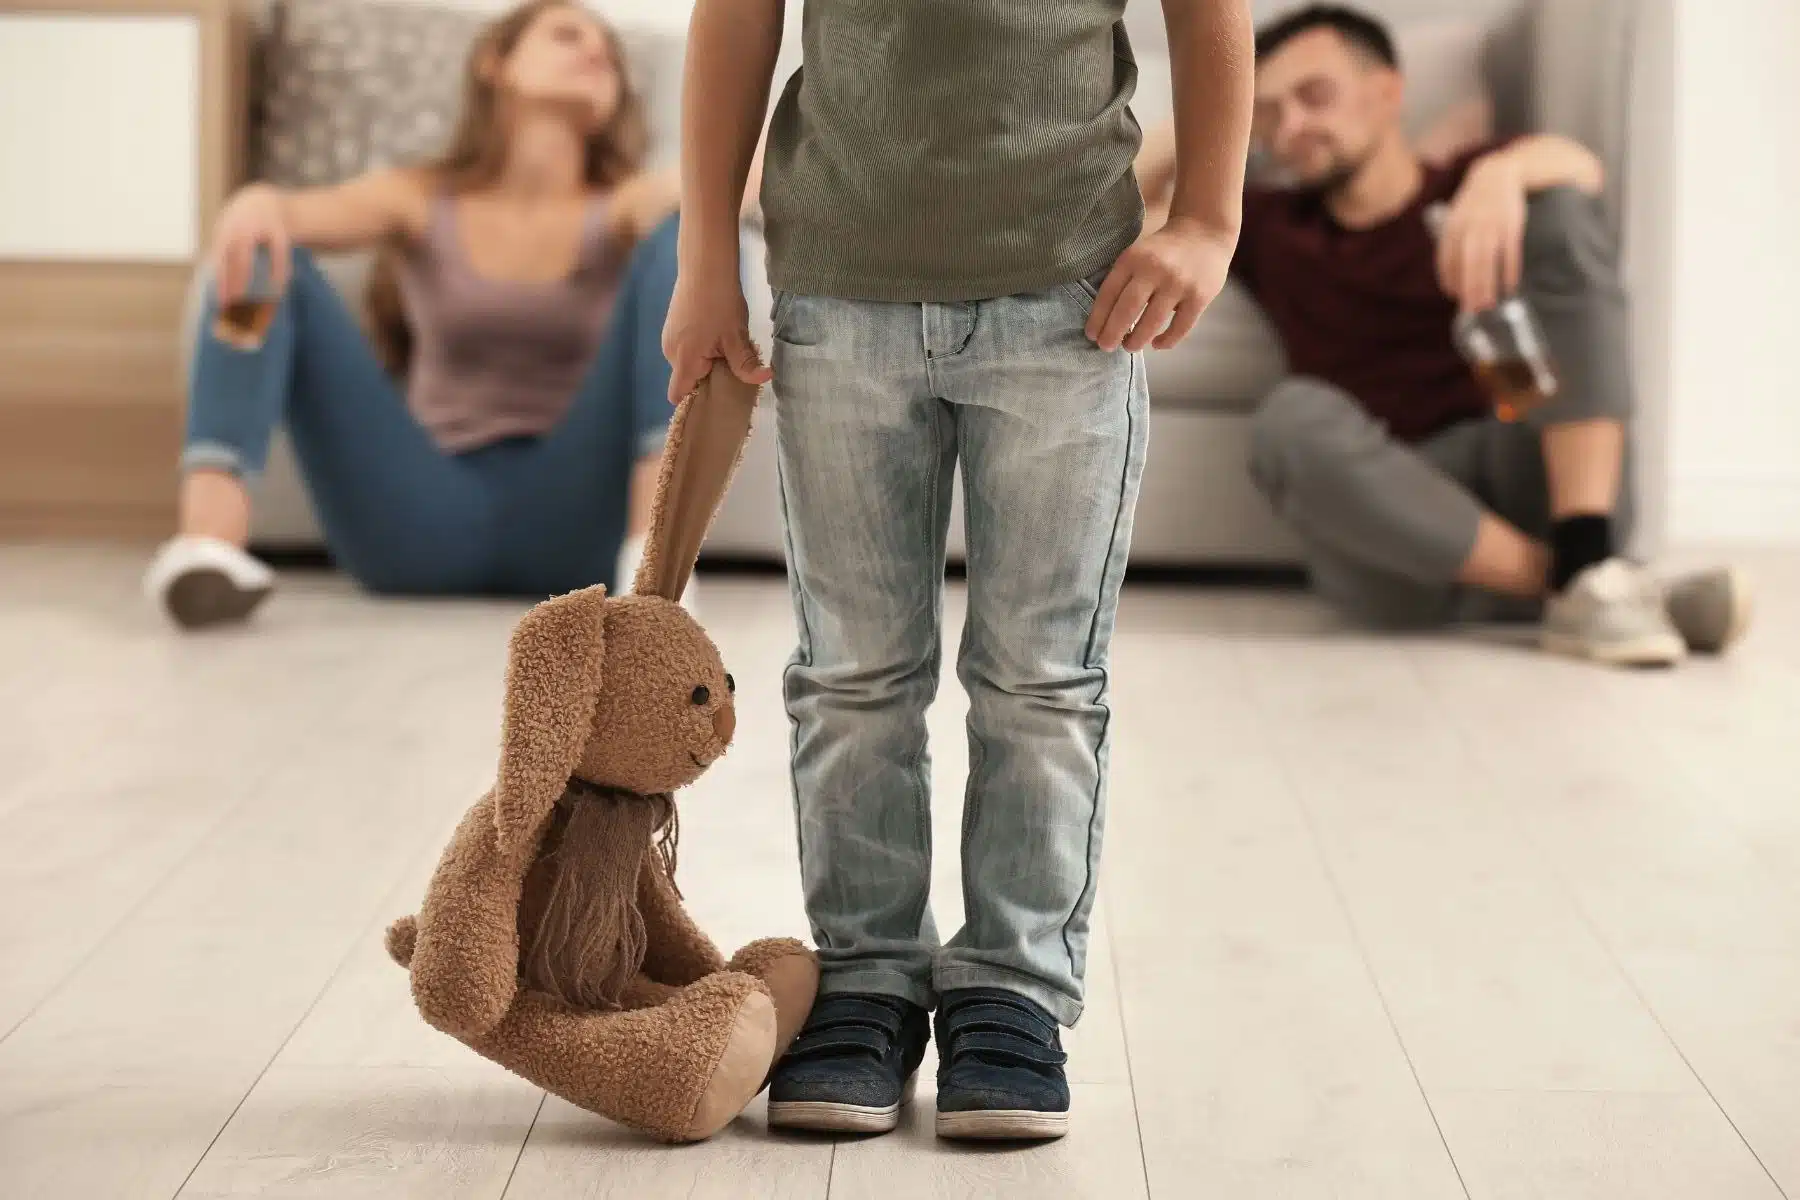 bottom half of child standing in forefront holding a worn stuffed bunny by the ear while parents are in blurred background slumped against the couch with drink in hand.